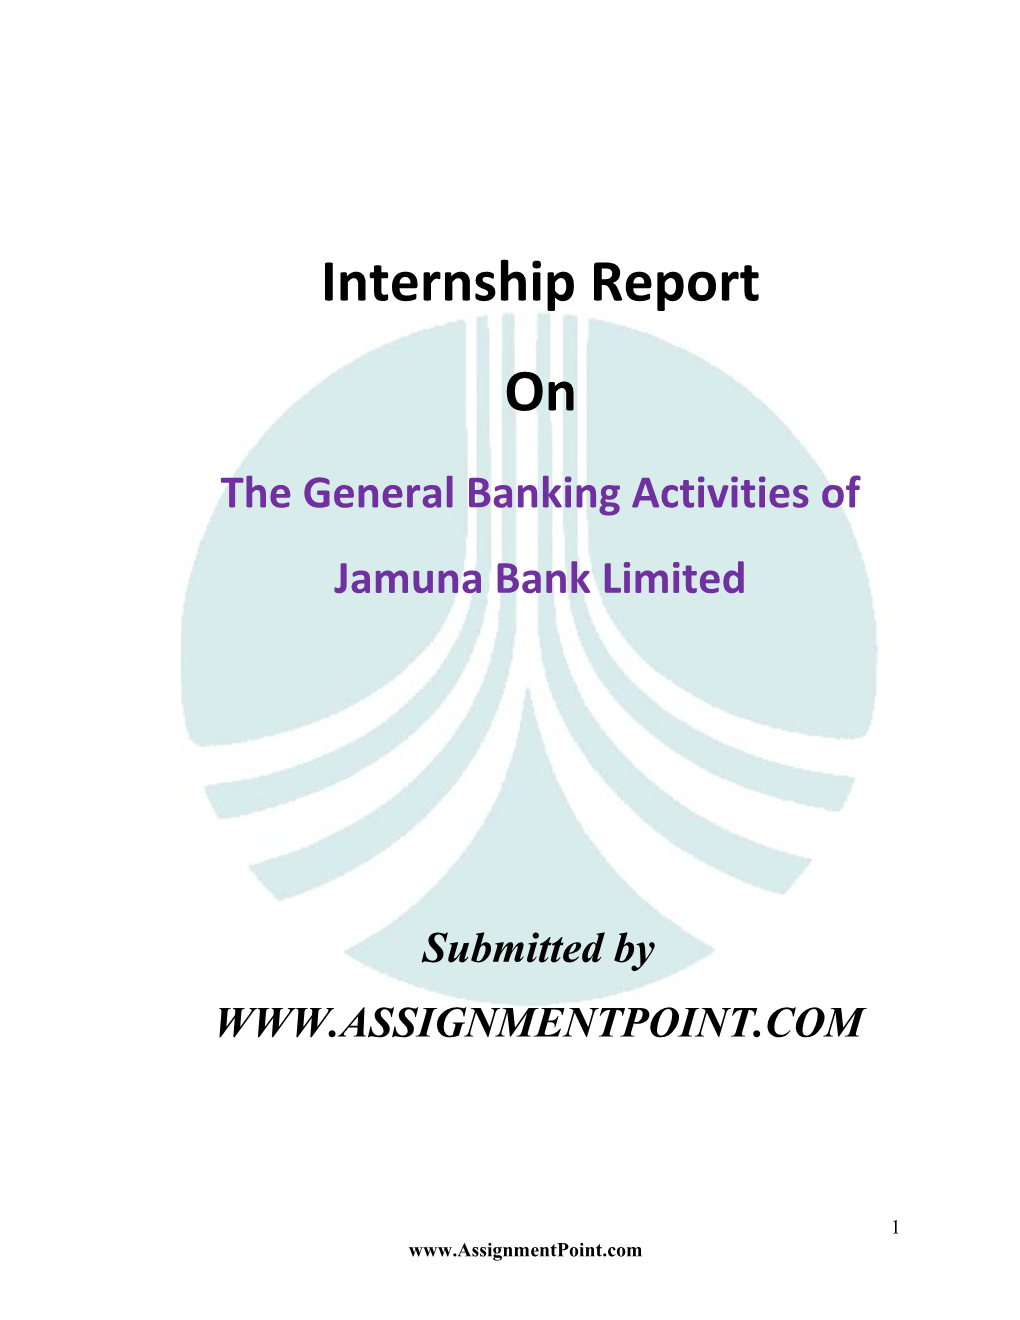 The General Banking Activities of Jamuna Bank Limited